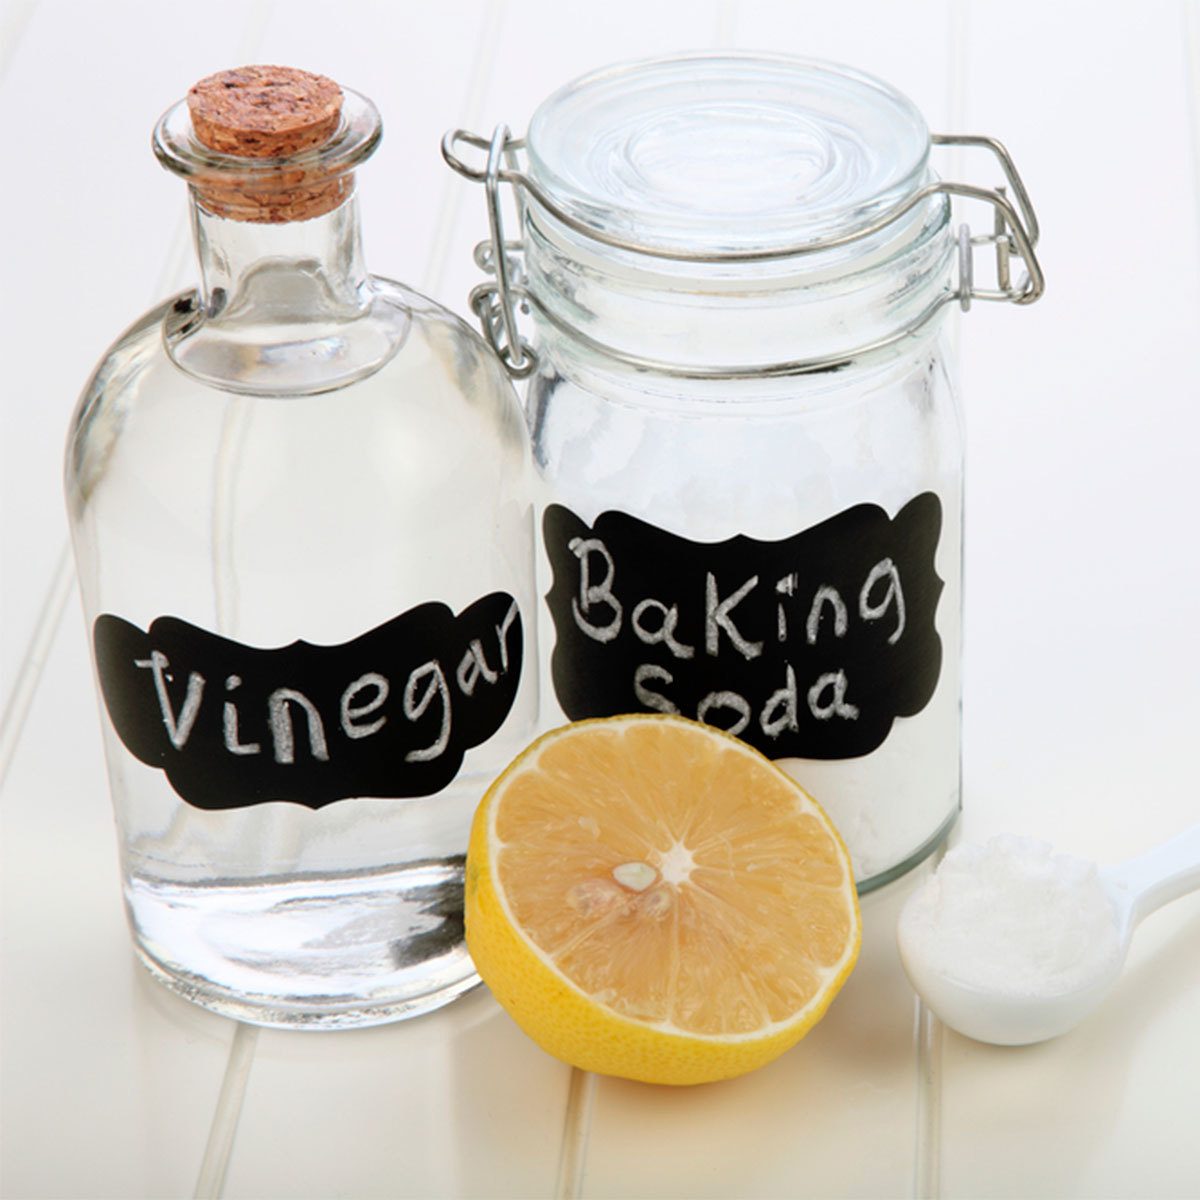 10 Amazing Homemade Kitchen Cleaning Solutions (Full Recipes)